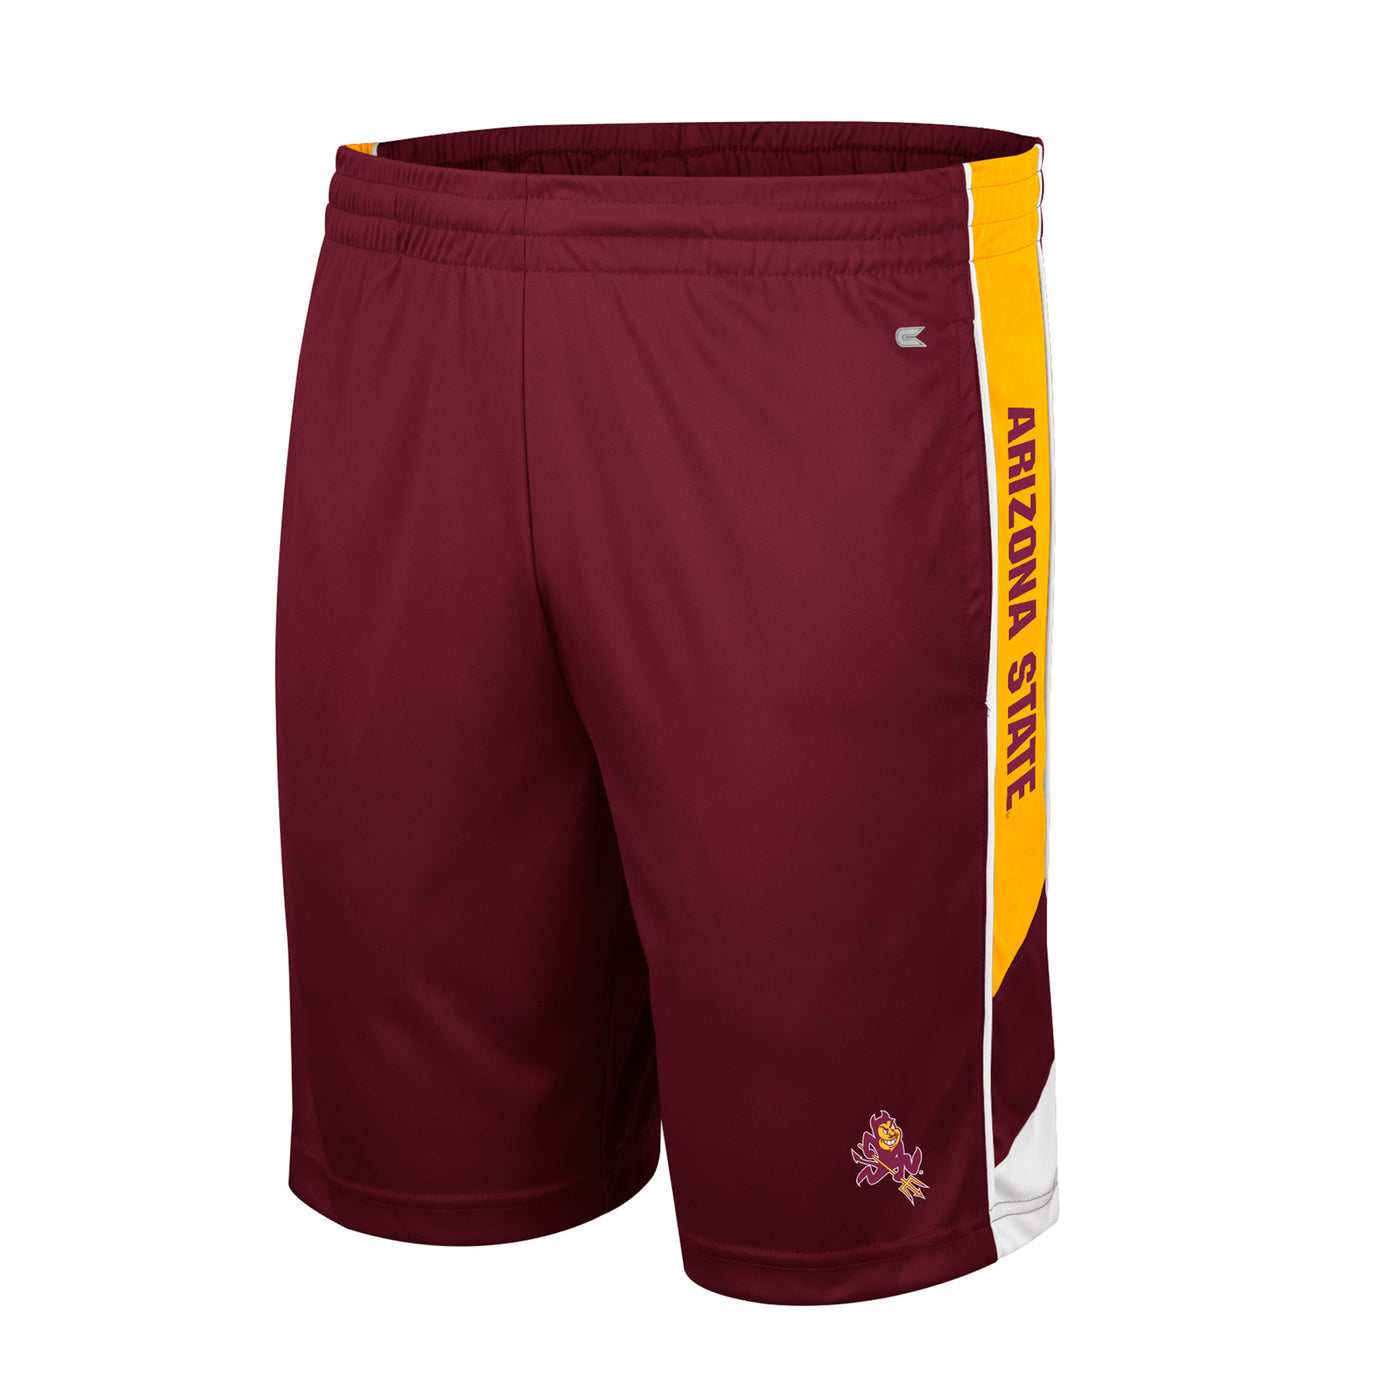 ASU maroon youth shorts with sparly on the leg and a gold stripe down the side with 'Arizona State' inside